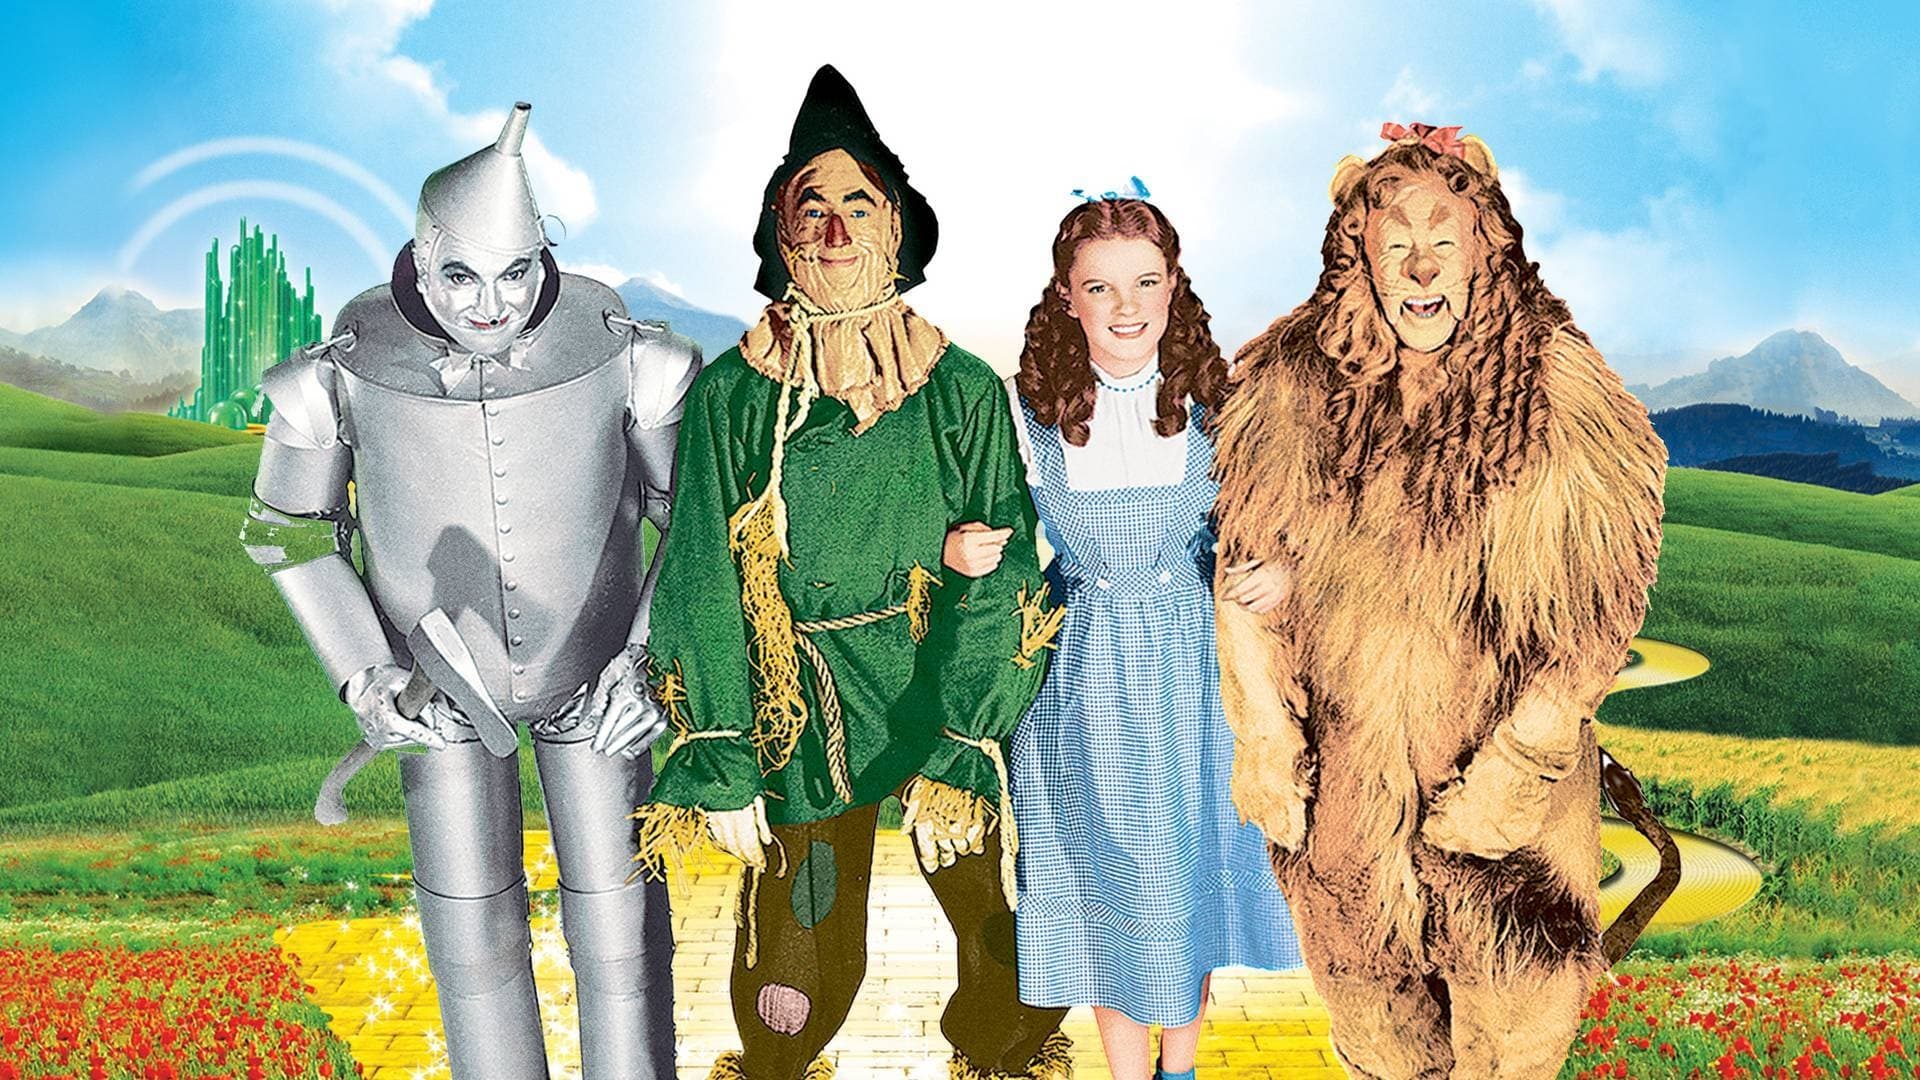 The Wizard of Oz Foto's.